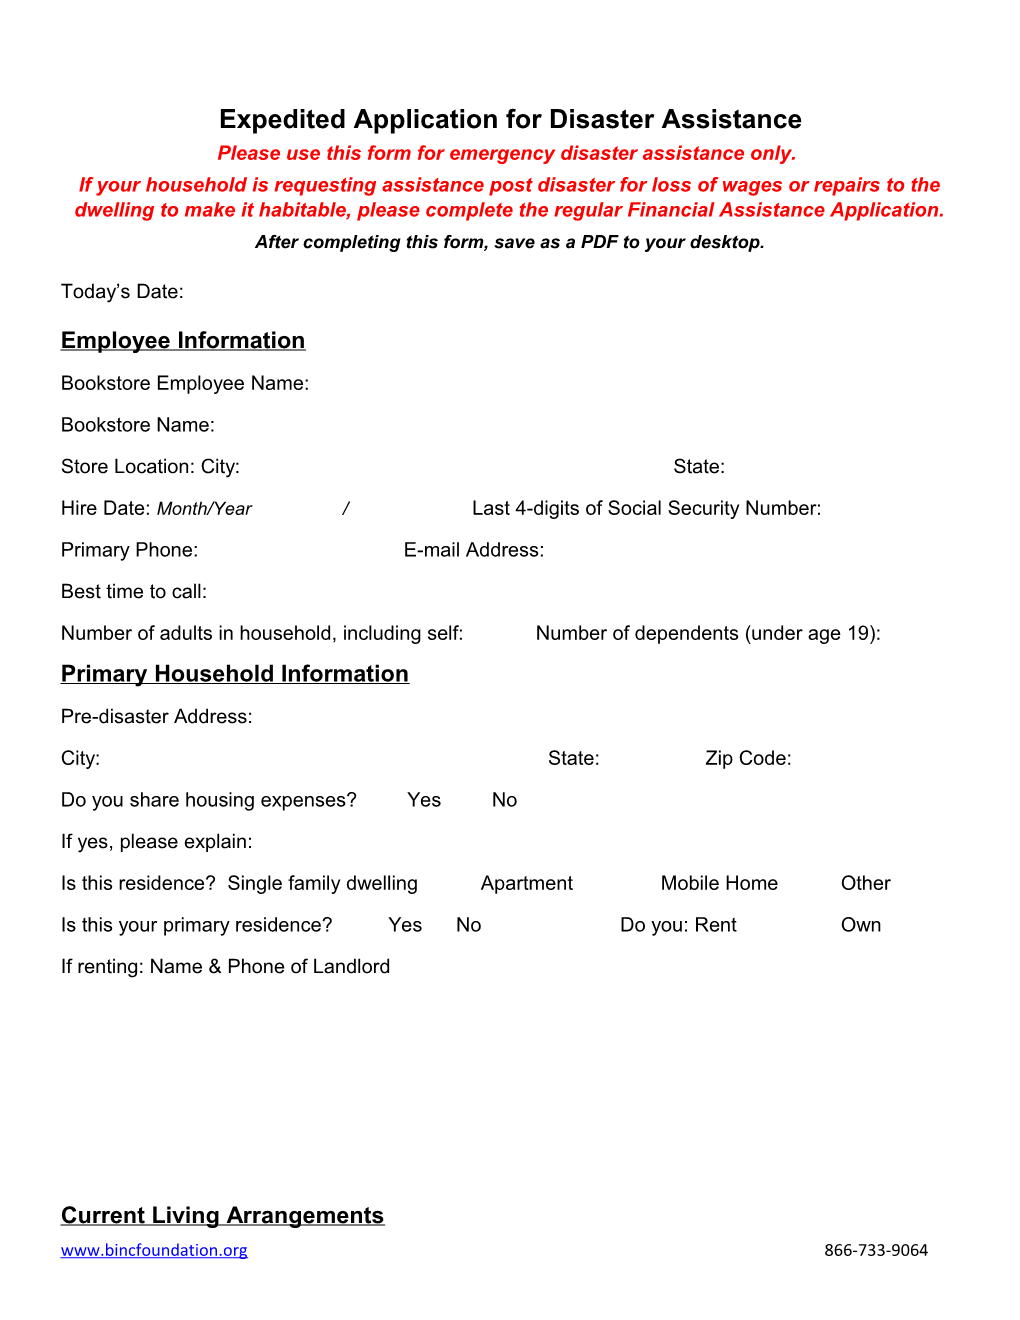 Expedited Application for Disaster Assistance